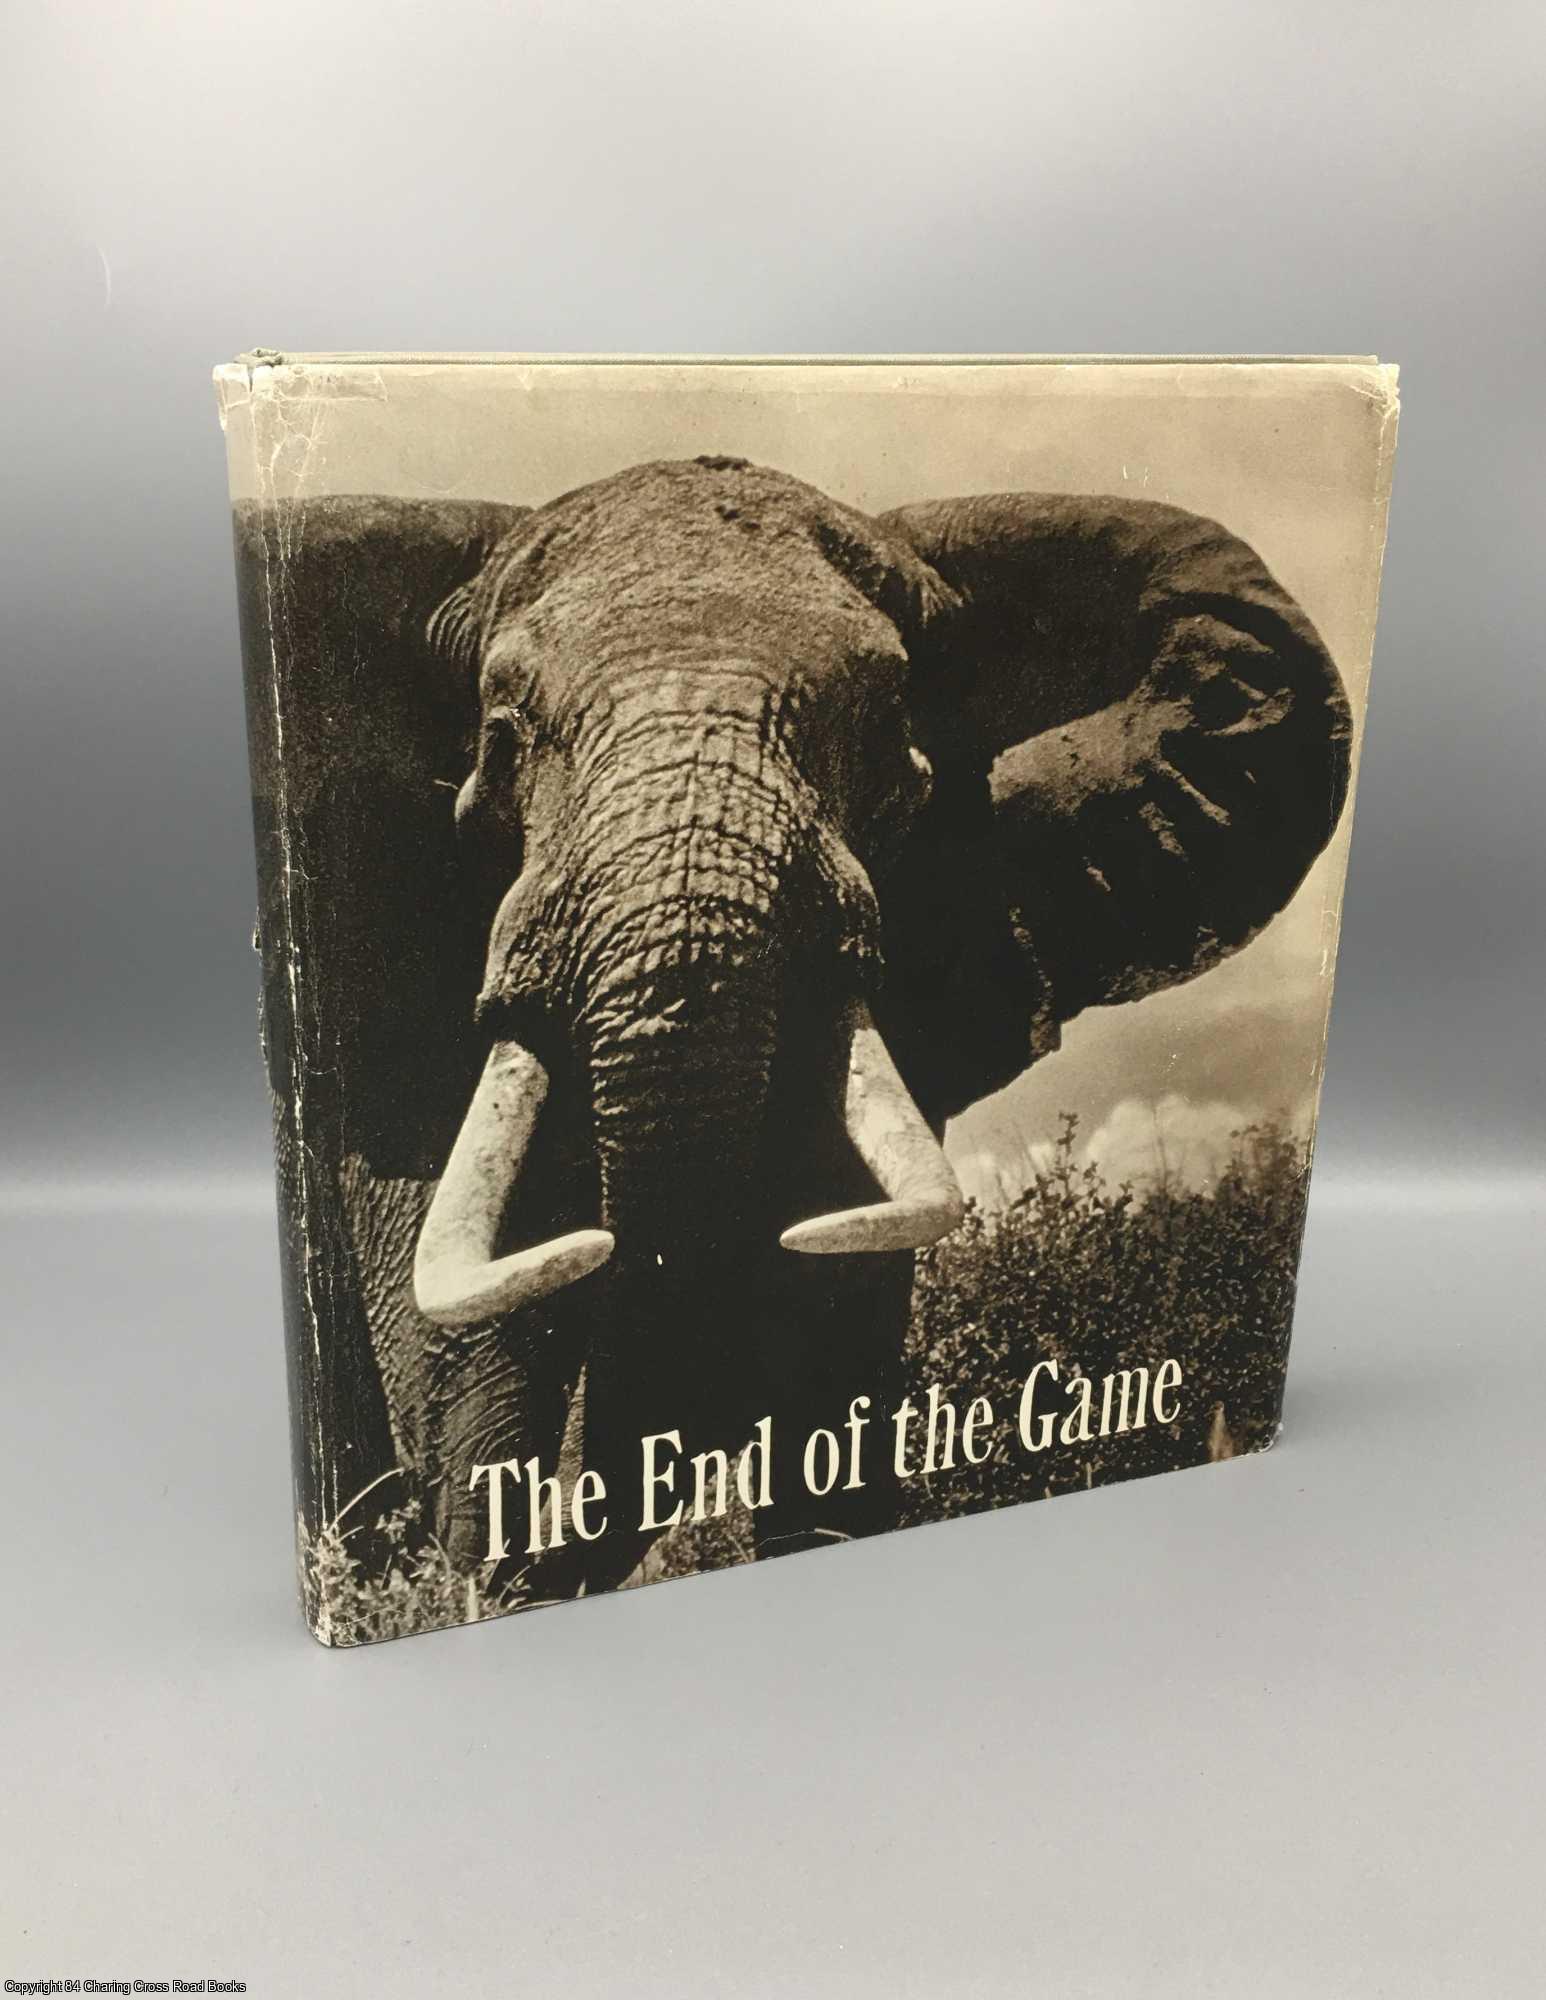 Peter Beard - The End of the Game: The Last Word from Paradise